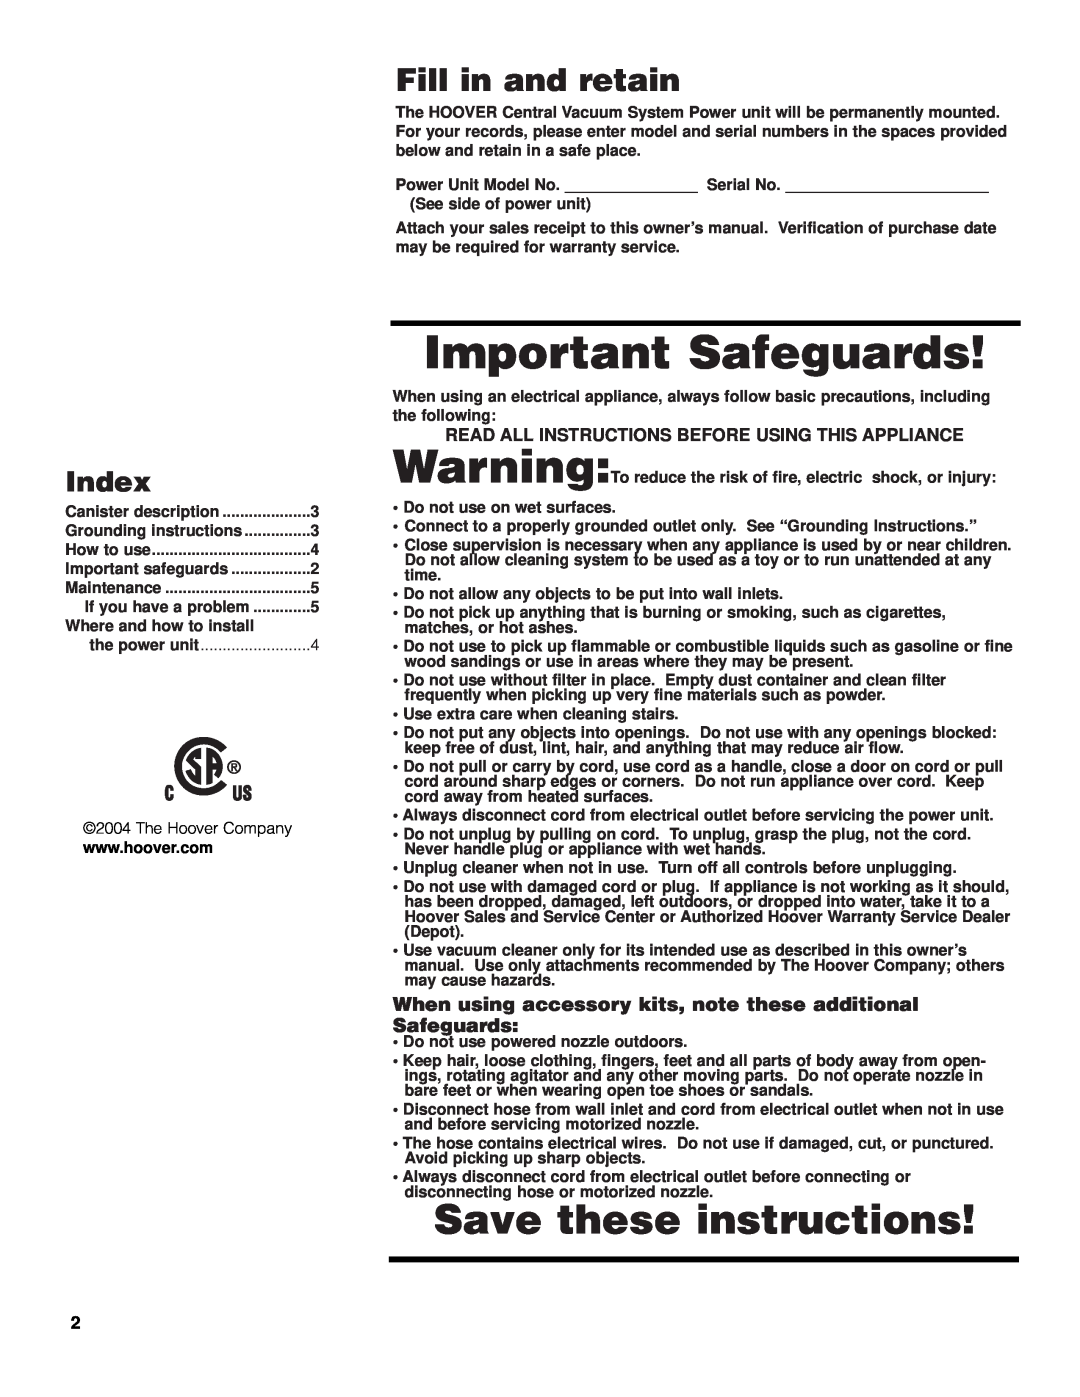 Hoover 120 V 60 HZ owner manual Important Safeguards, Fill in and retain, Index, Save these instructions 